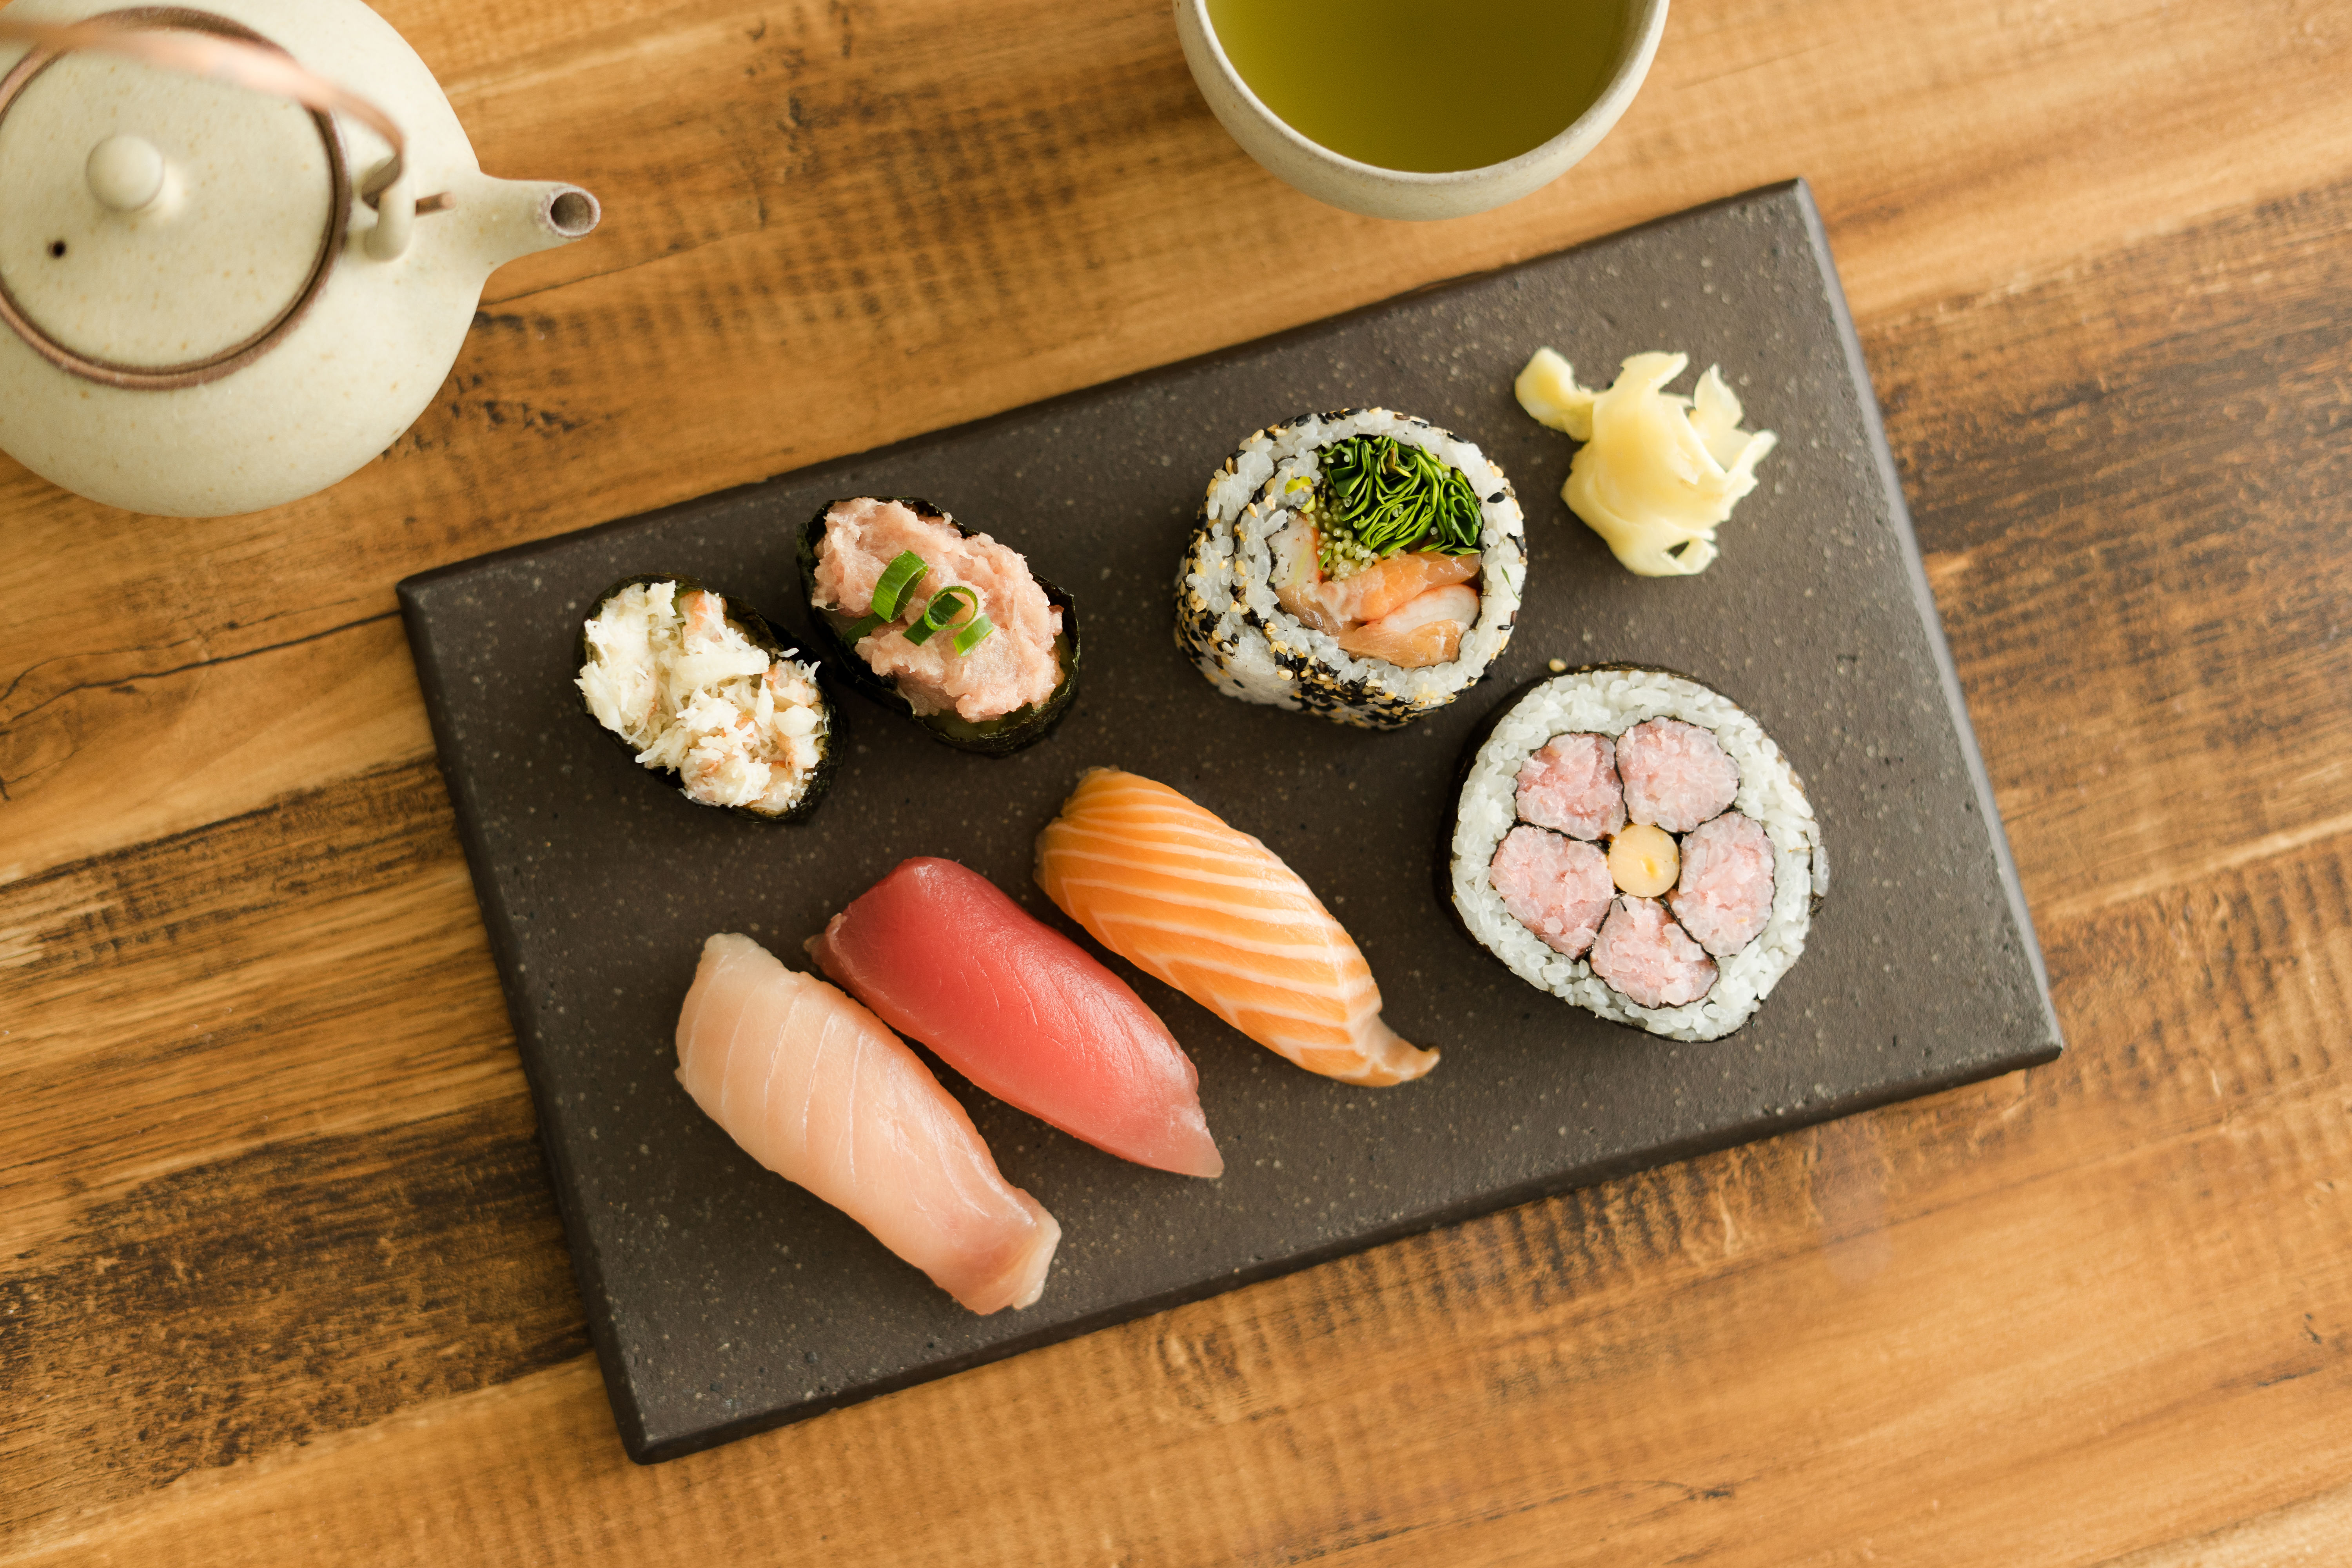 Learn how to make sushi with friendly English-speaking instructors in Tokyo